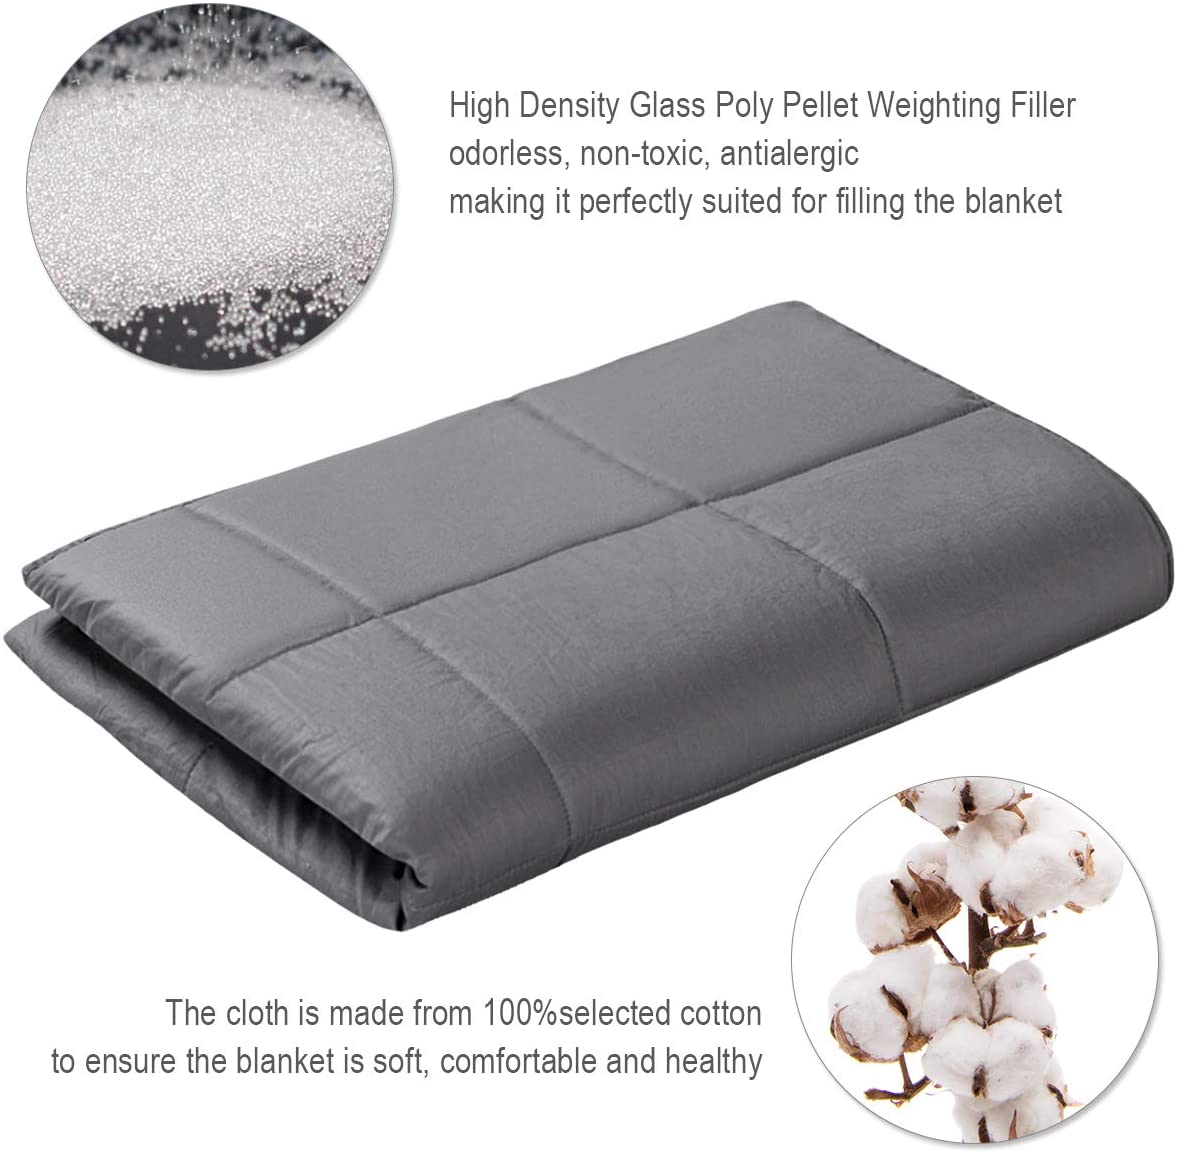 Weighted Blanket 20lbs |60"x80"| Queen Size